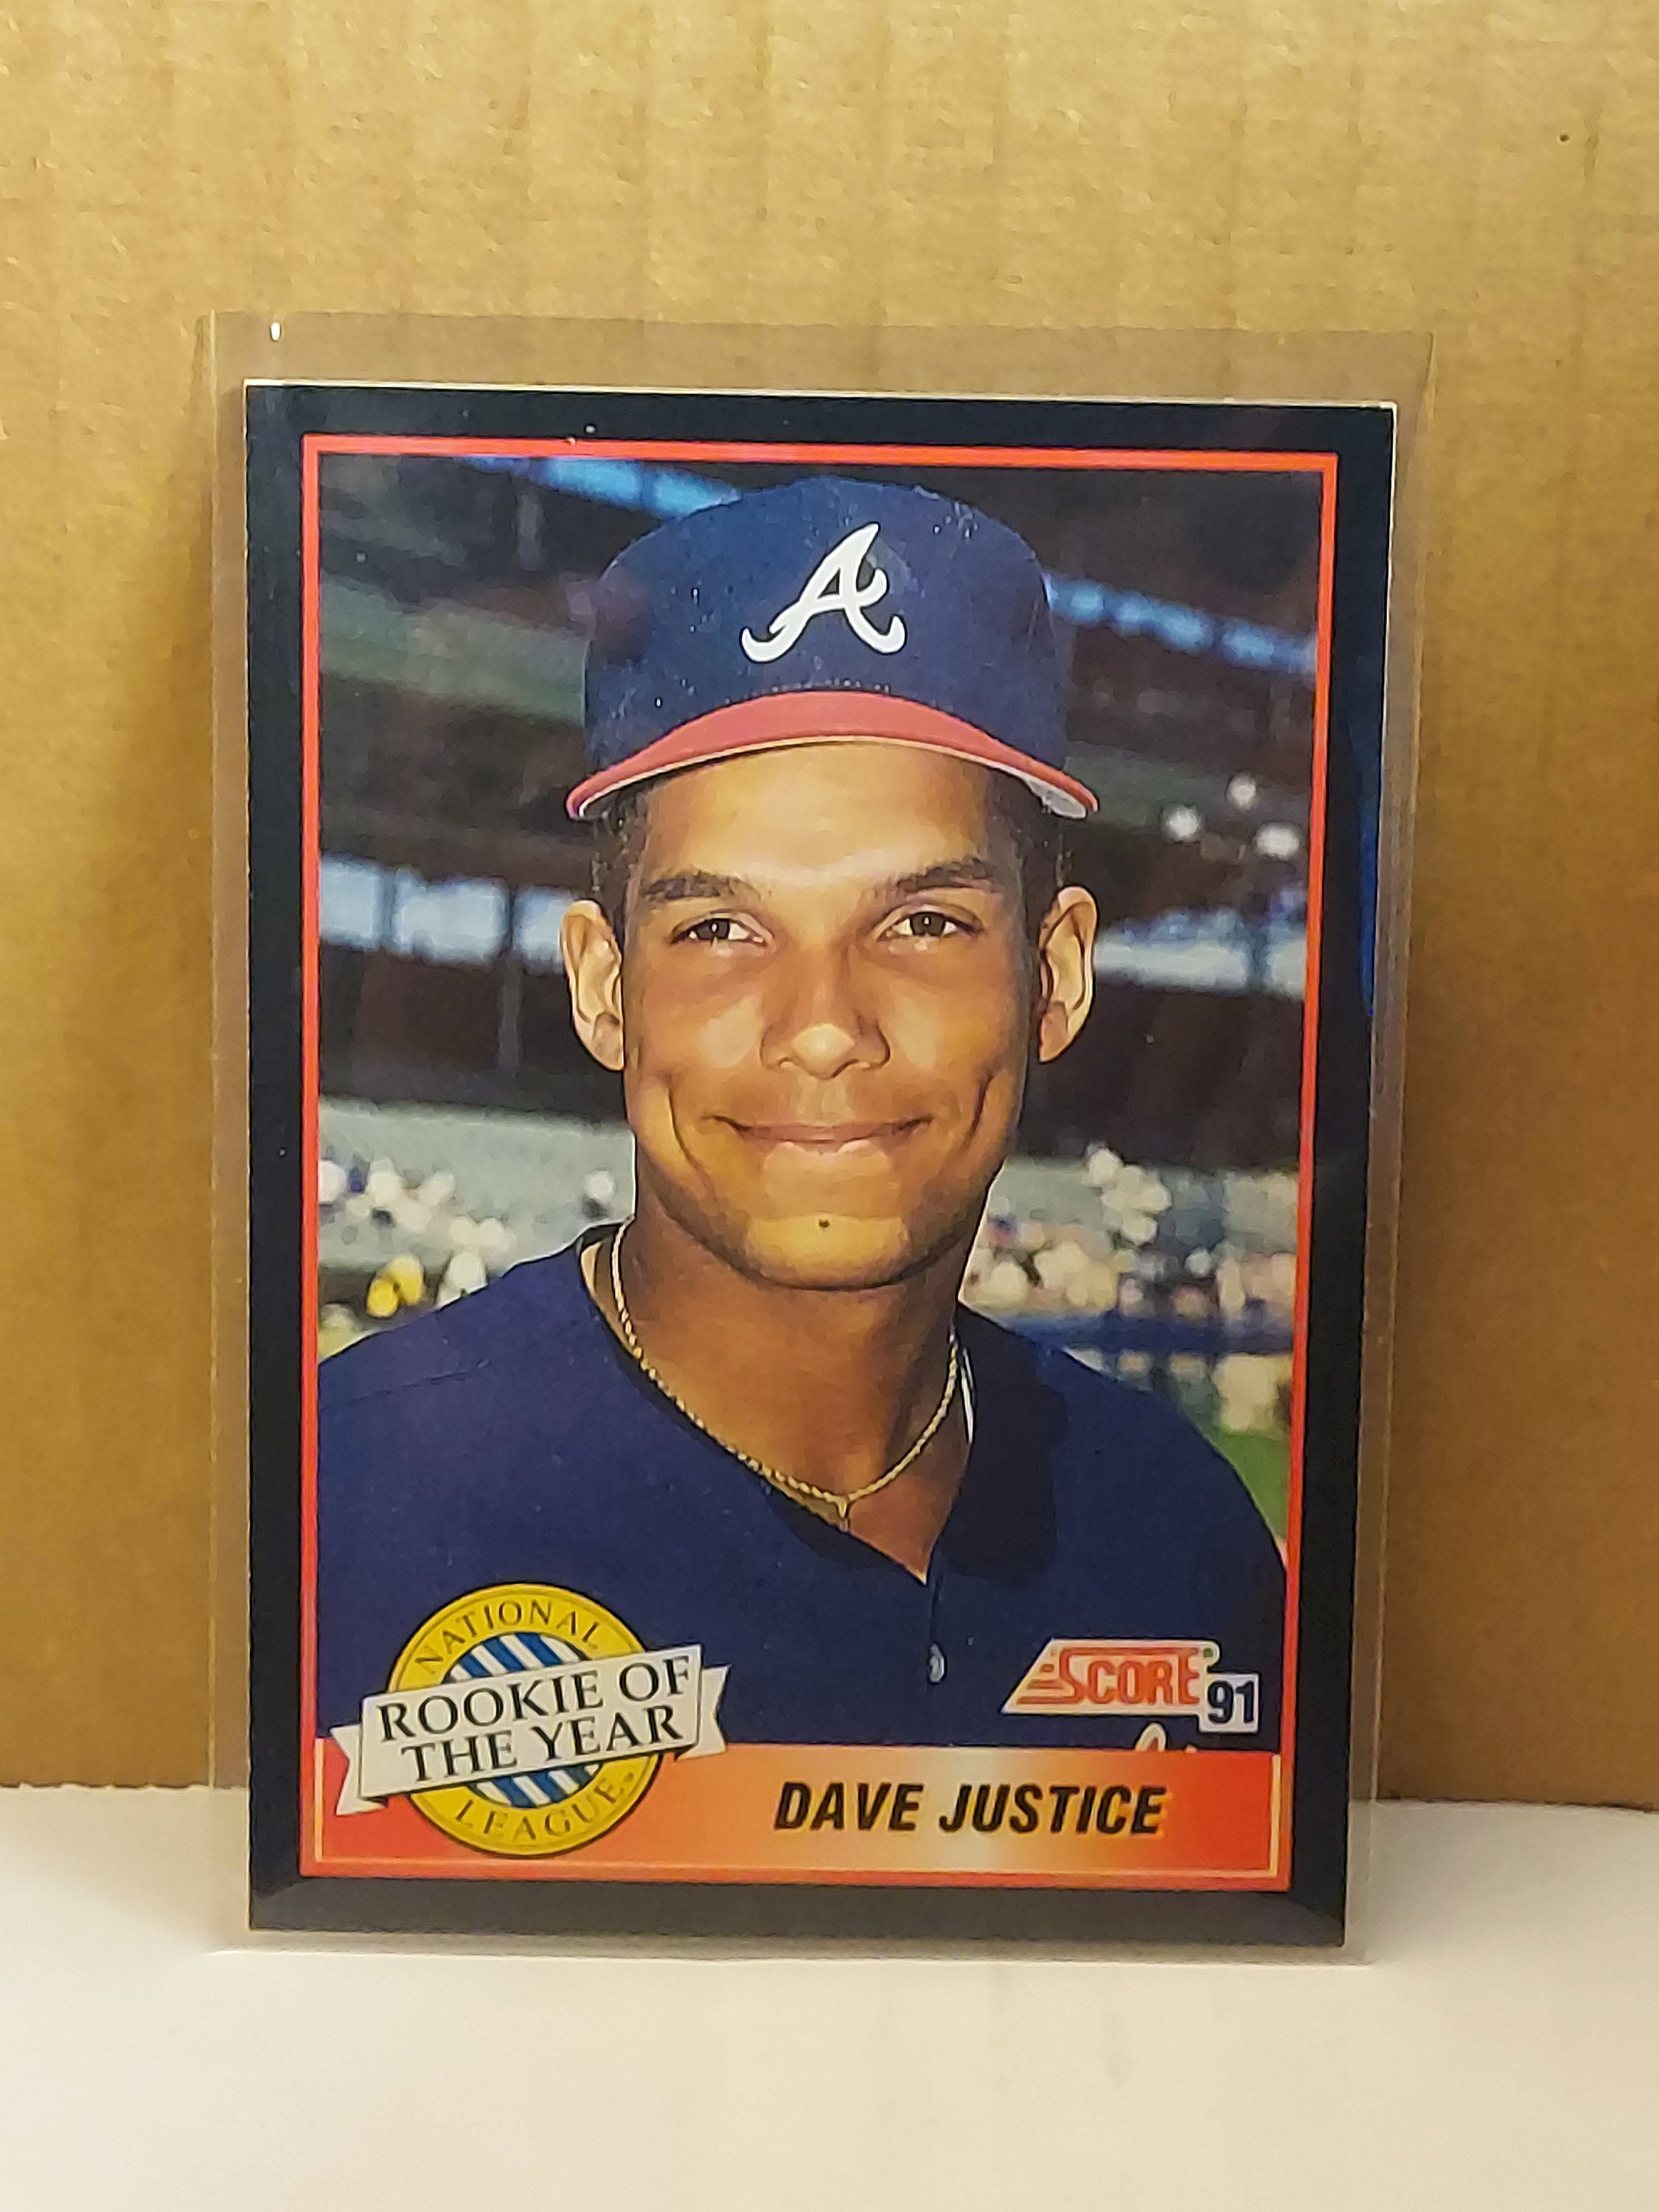  1990 Donruss Dave Justice #704 NM Near Mint RC Rookie